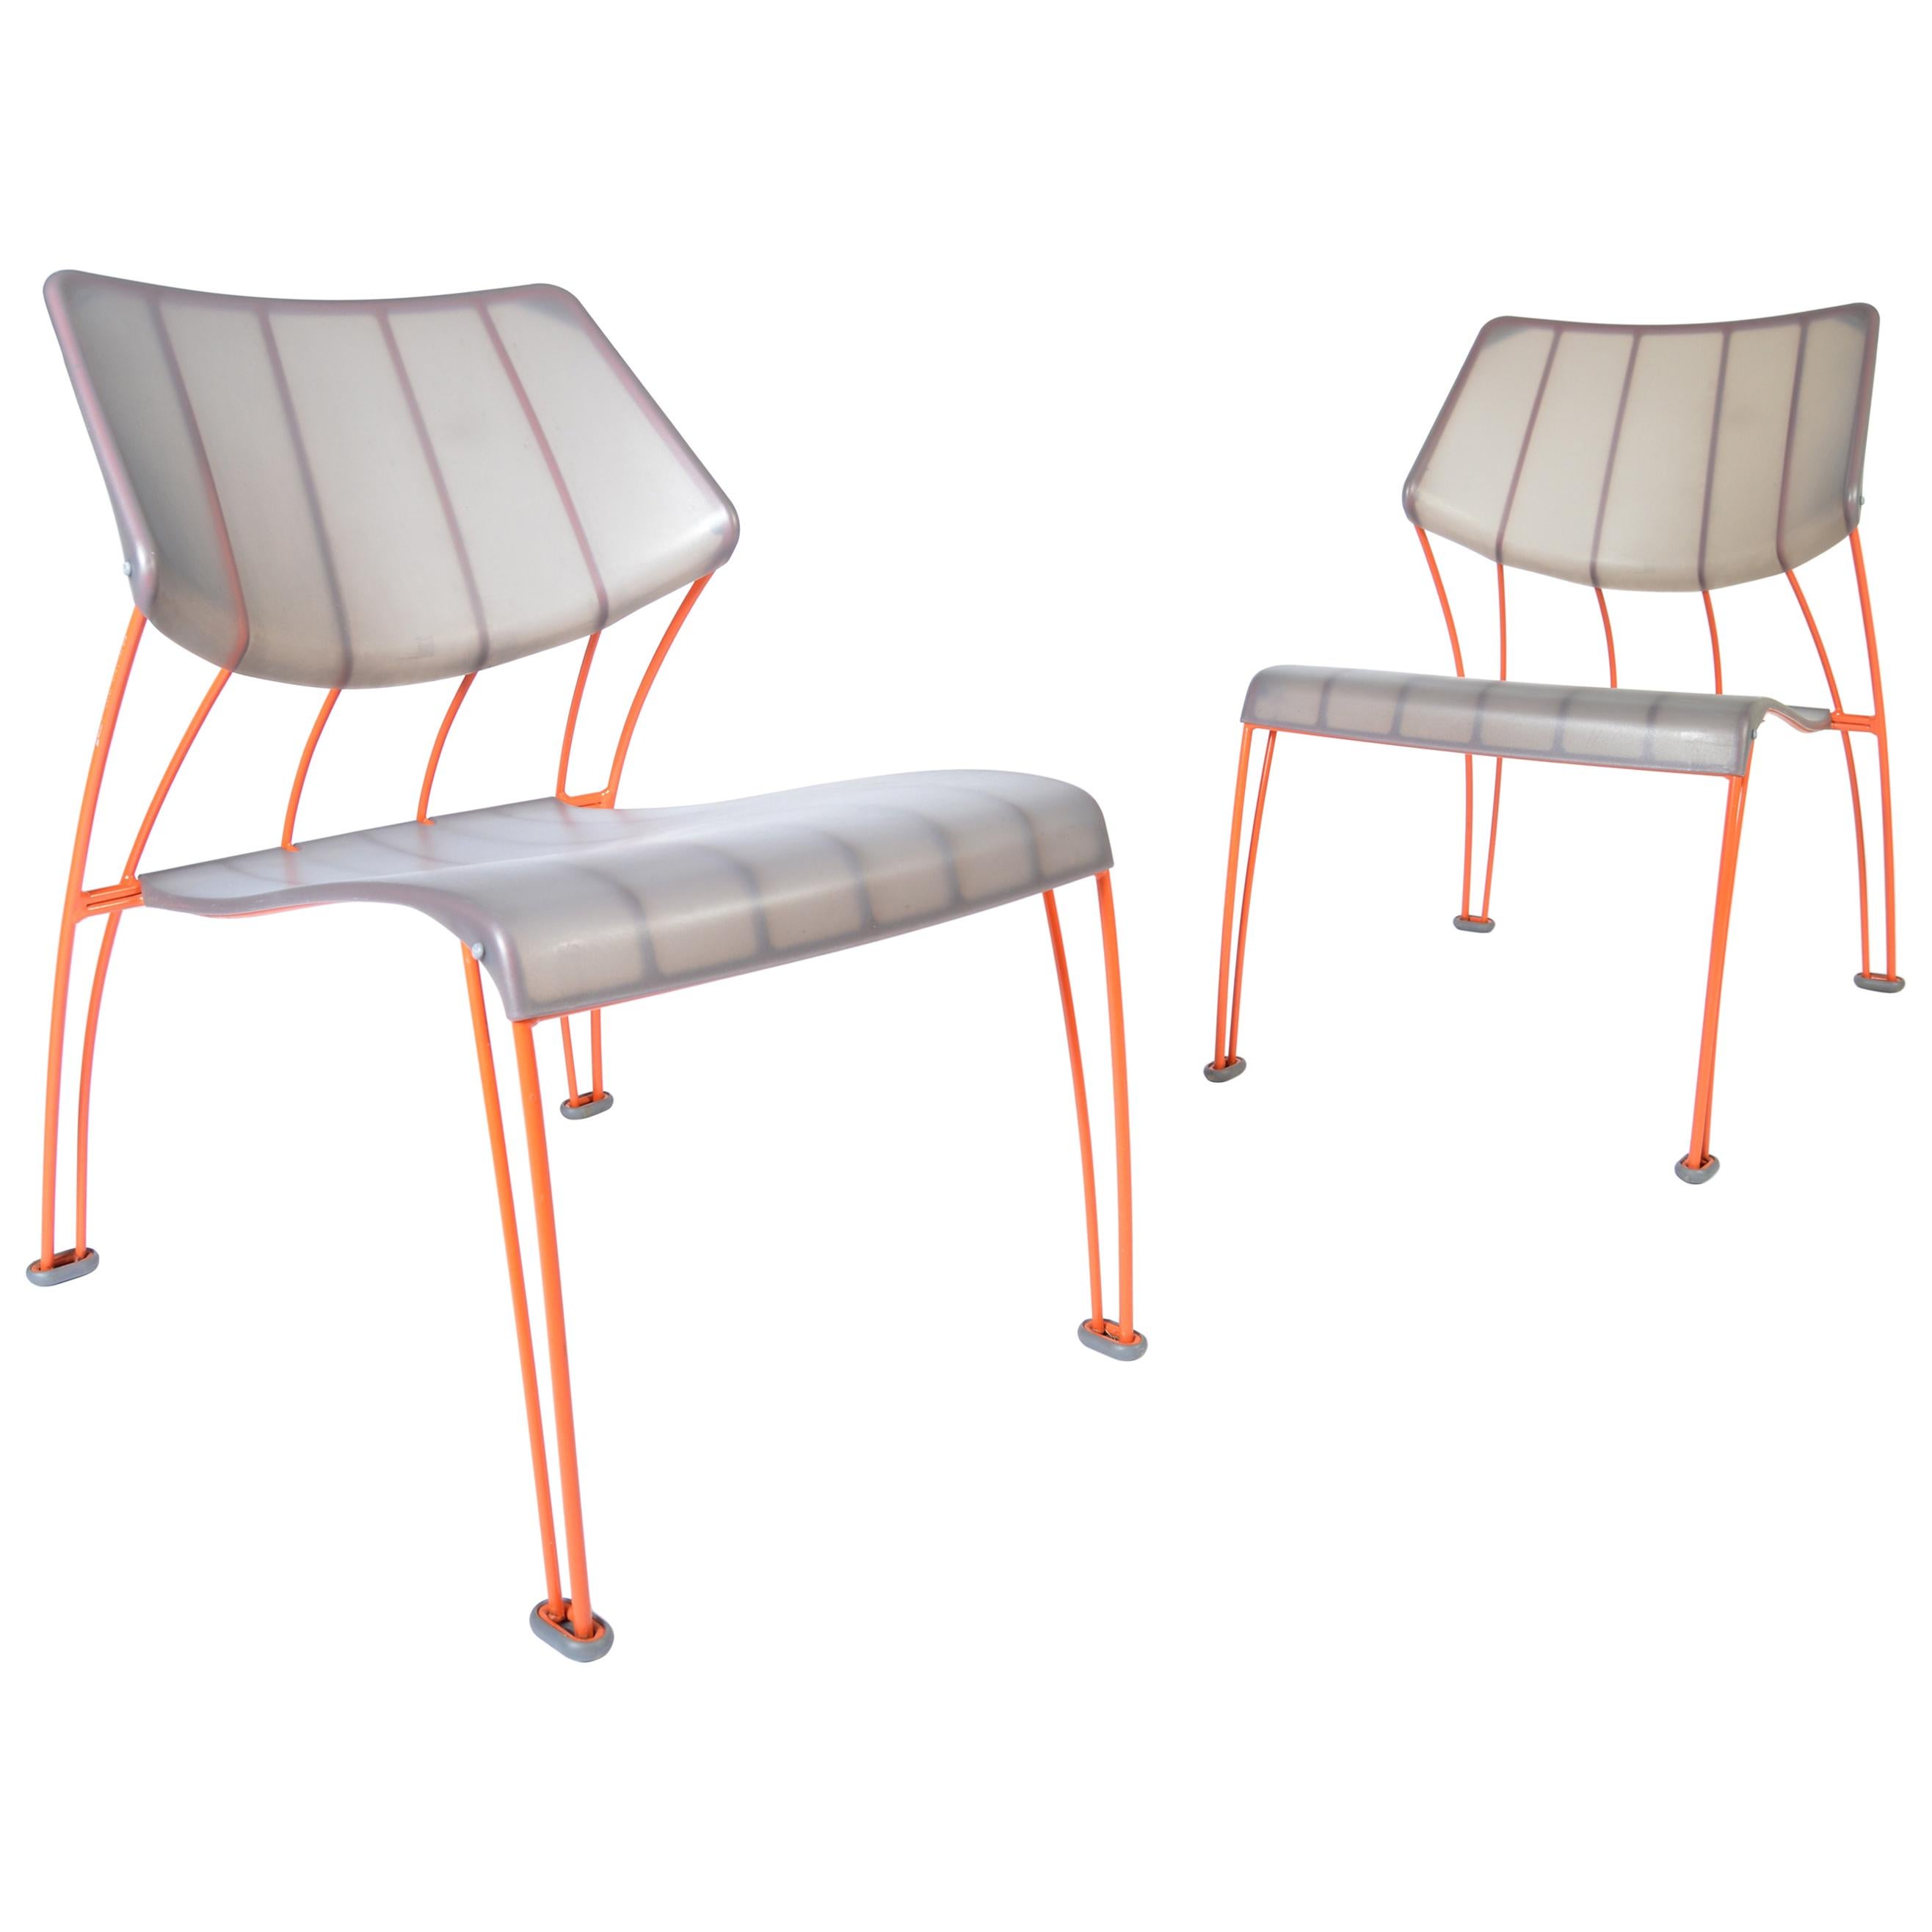 Pair of Monika Mulder PS Hasslo for Ikea Outdoor Lounge Chairs, circa 1990